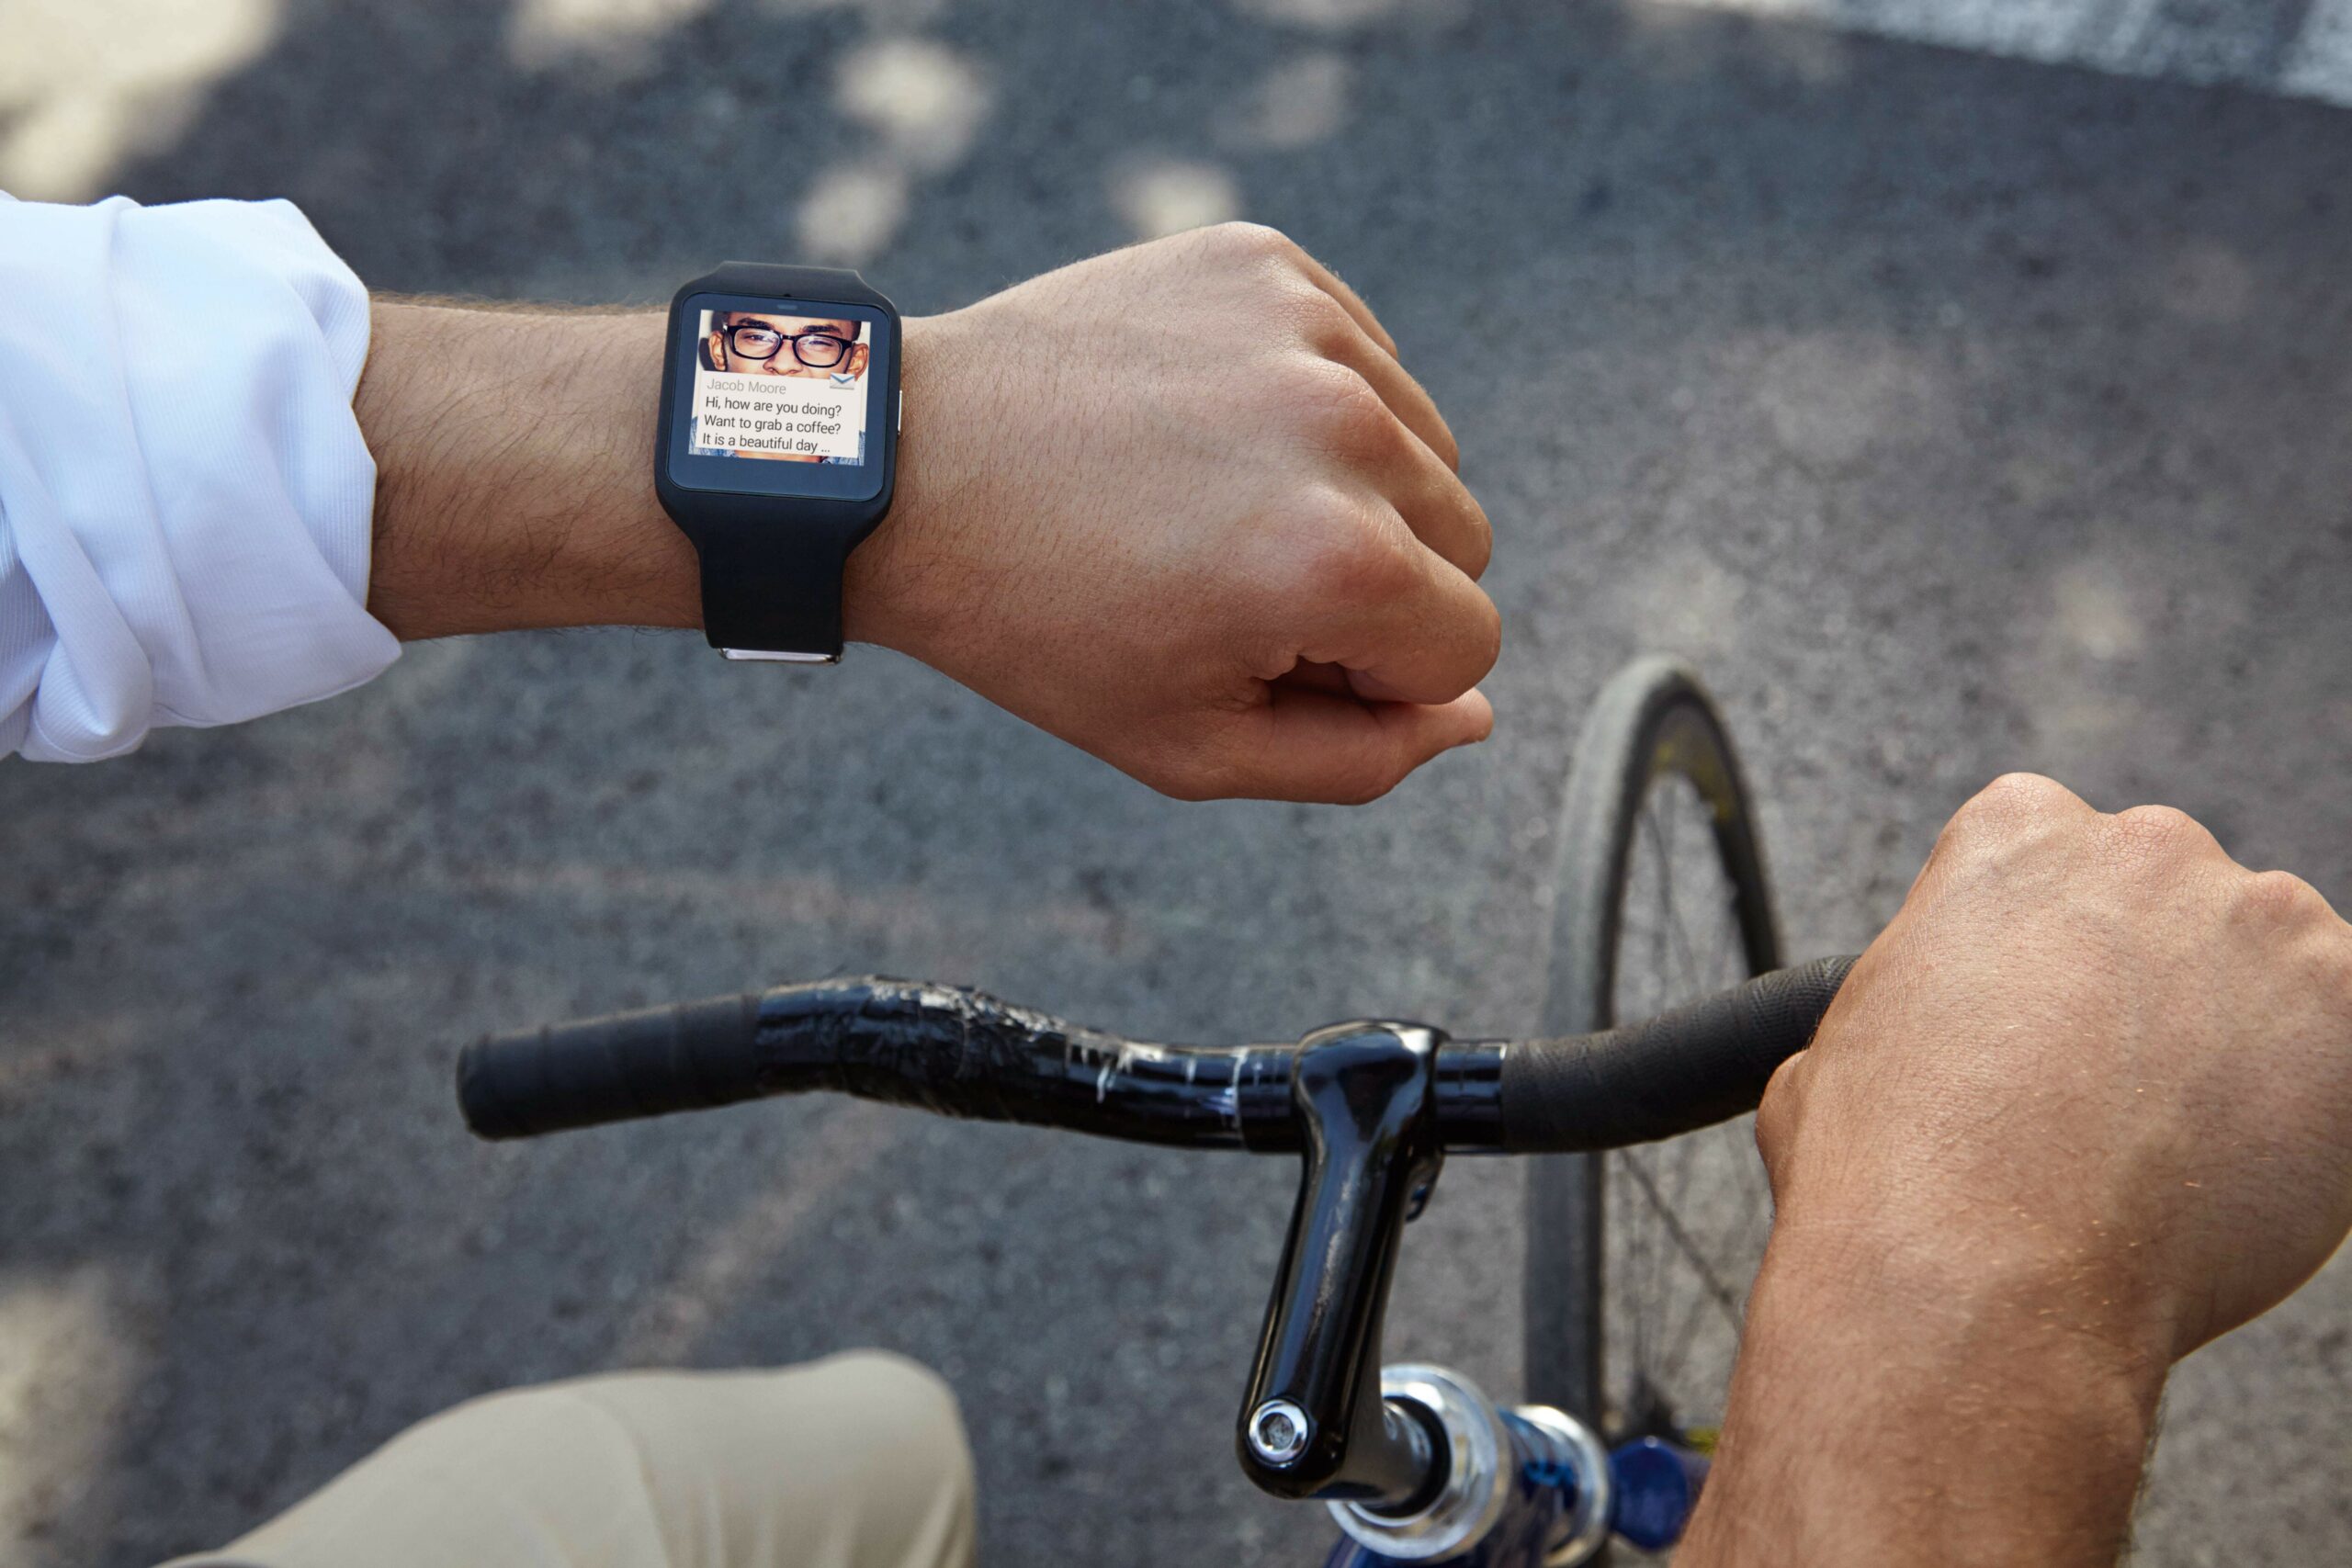 Sony’s Next Smartwatch Might Be Made Entirely From E-Paper